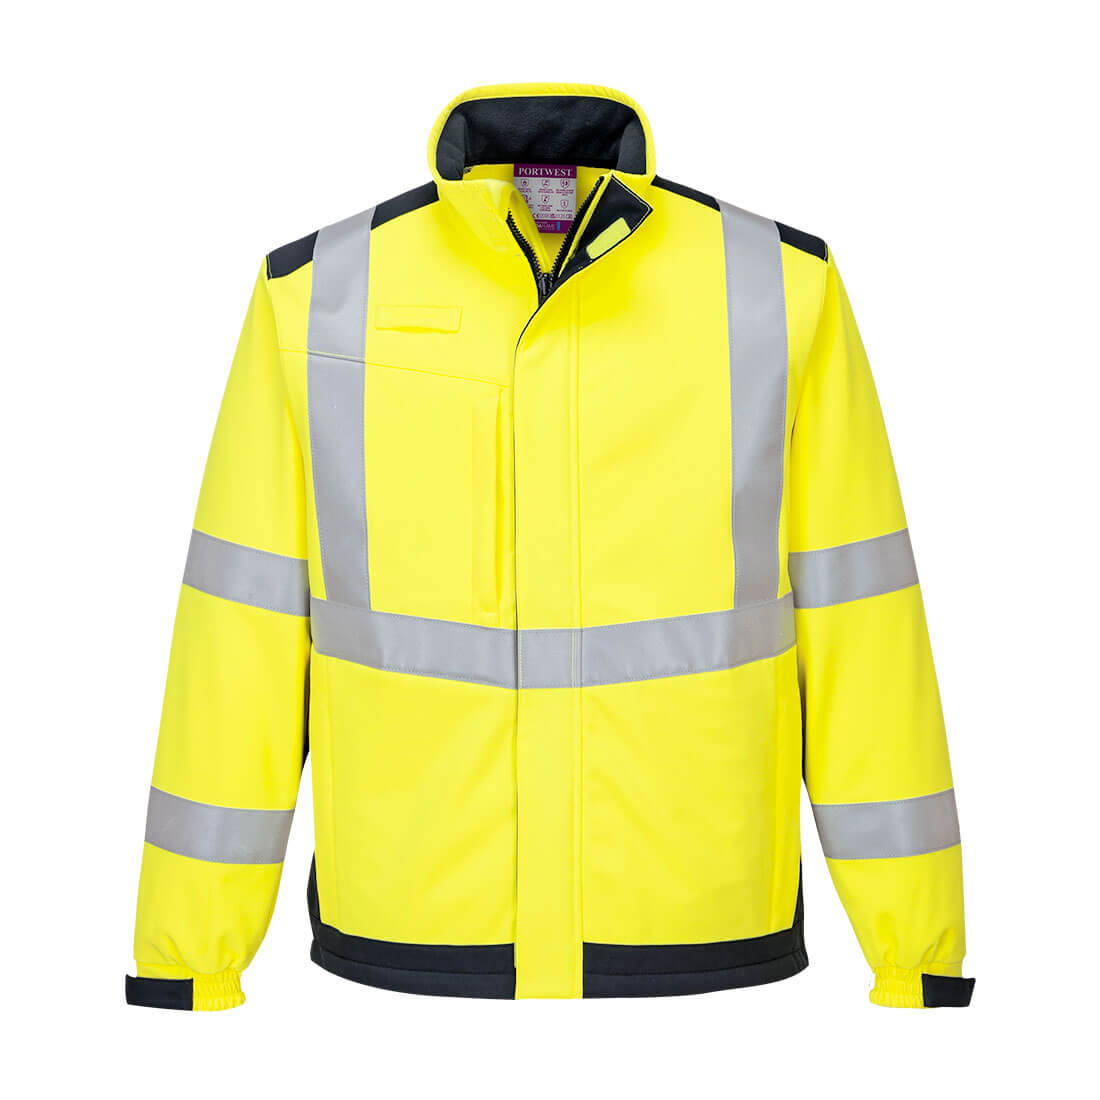 Modaflame Multi Norm Arc Softshell Jacket - Yellow/Navy